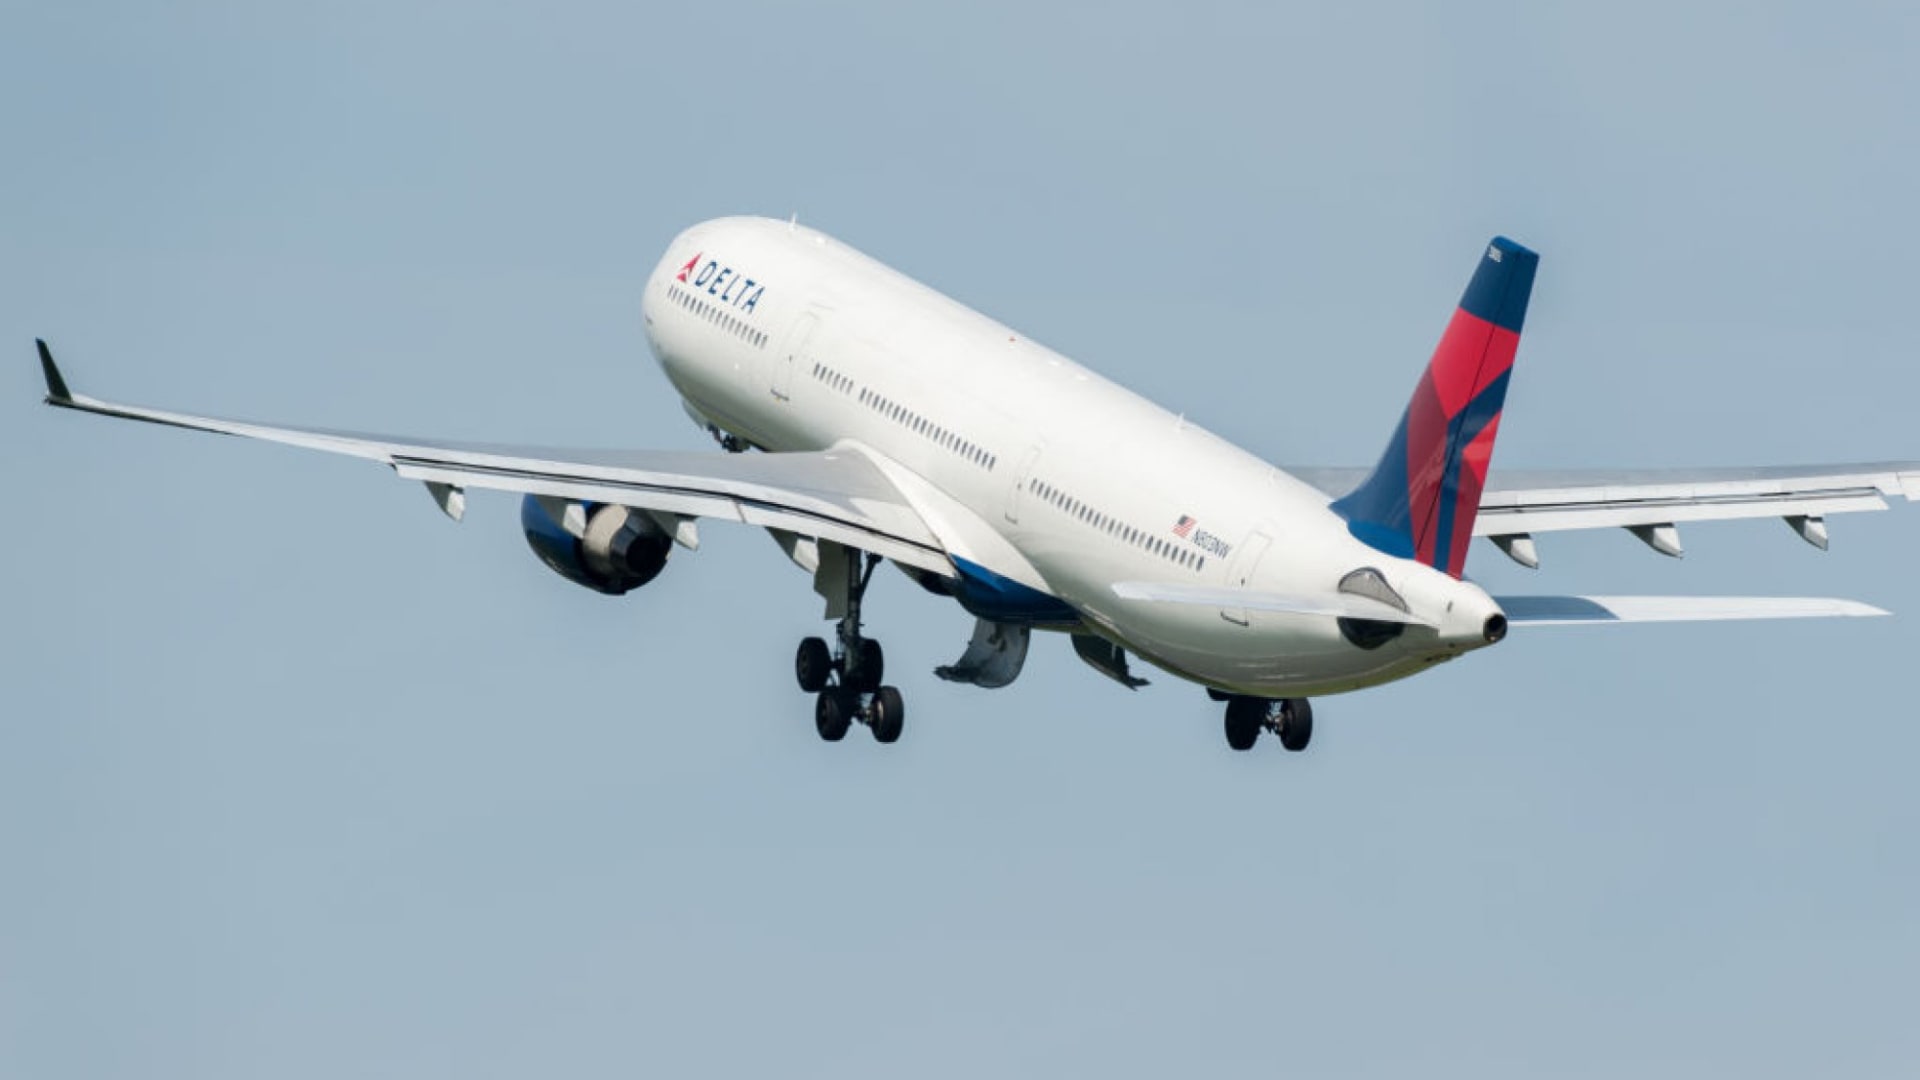 After 88 Long Years, Delta Air Lines Just Did Something Brilliant That Will Change the Way Many People Travel